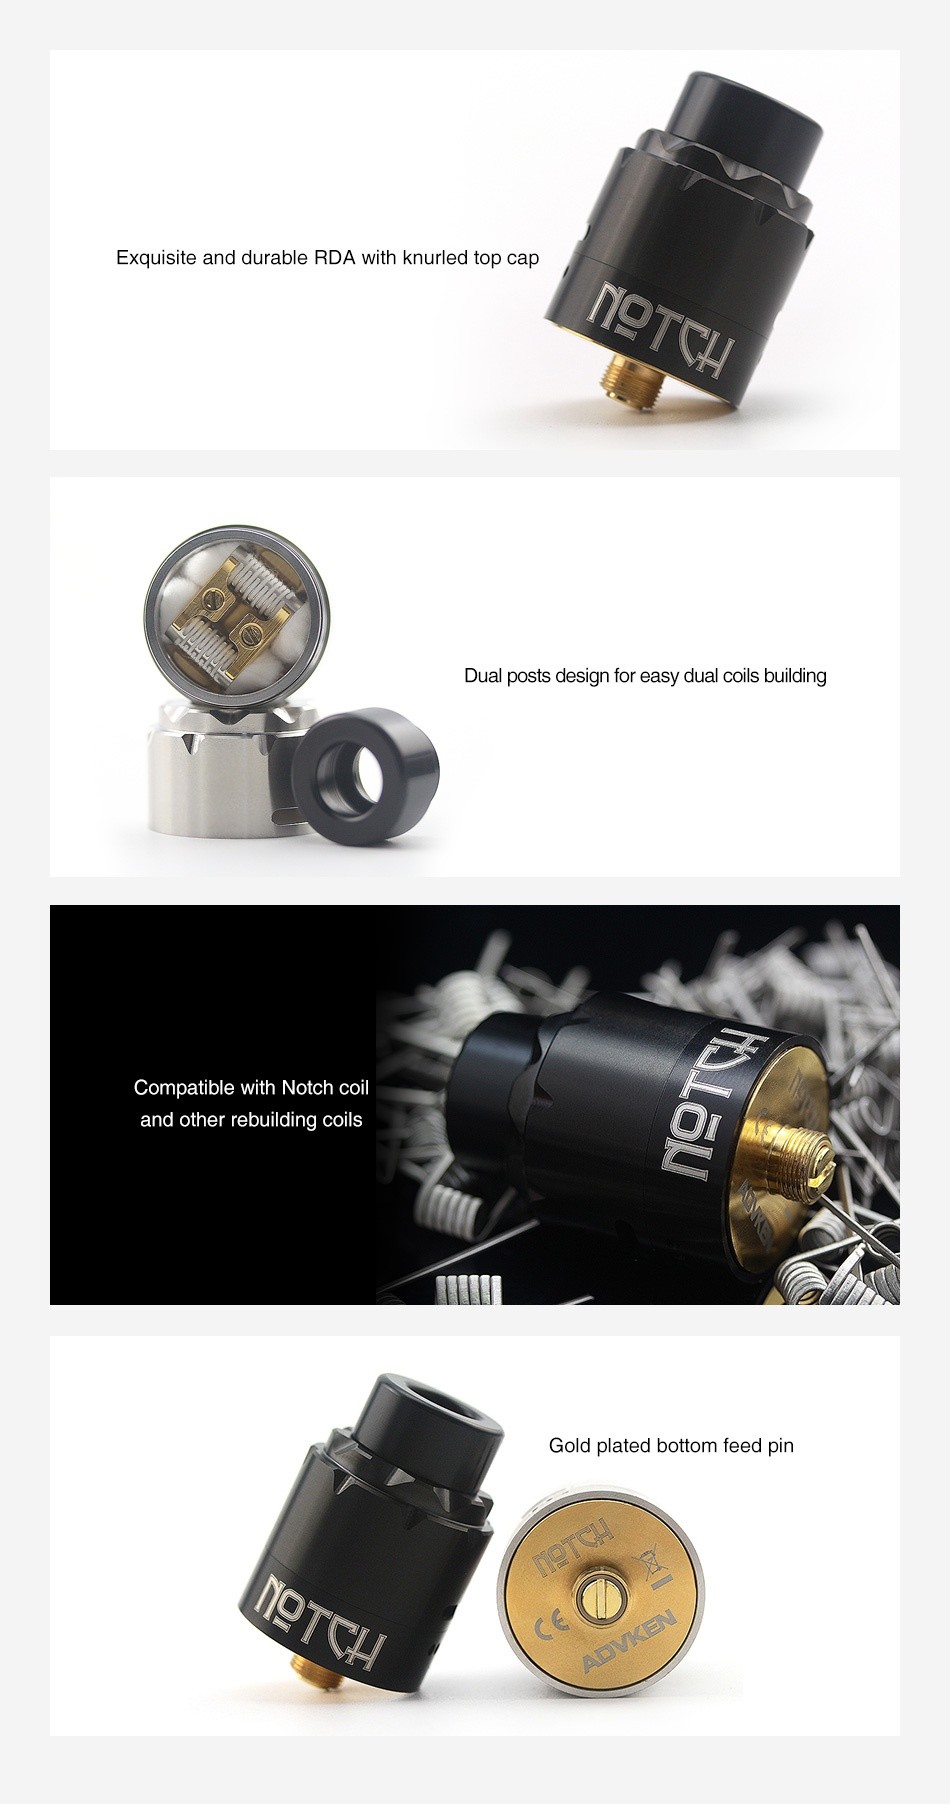 Advken Notch RDA Exquisite and durable RDa with knurled top cap Dual posts design for easy dual coils building with notch coi and other rebuilding coils Gold plated bottom feed pin